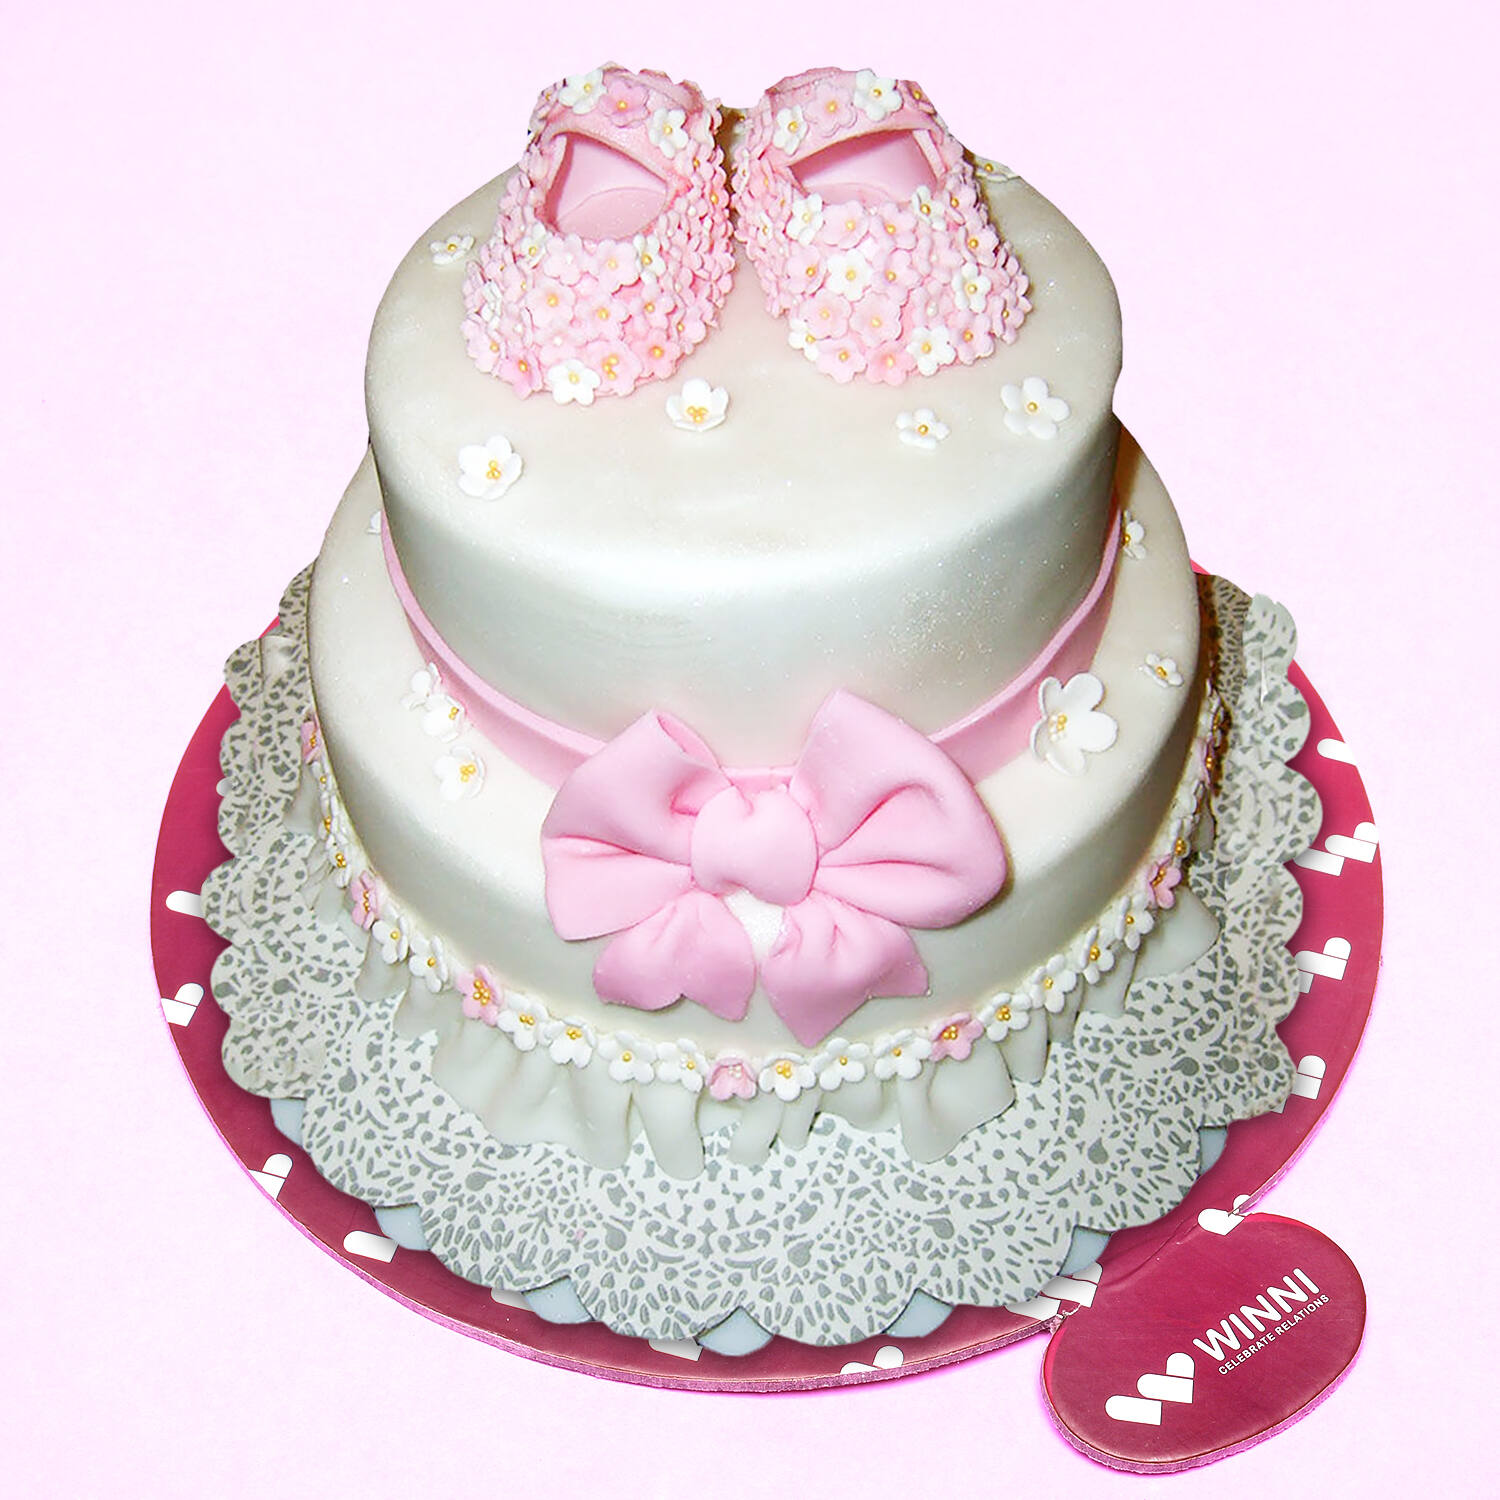 Coolest Baby Shower Cake Tips and Ideas